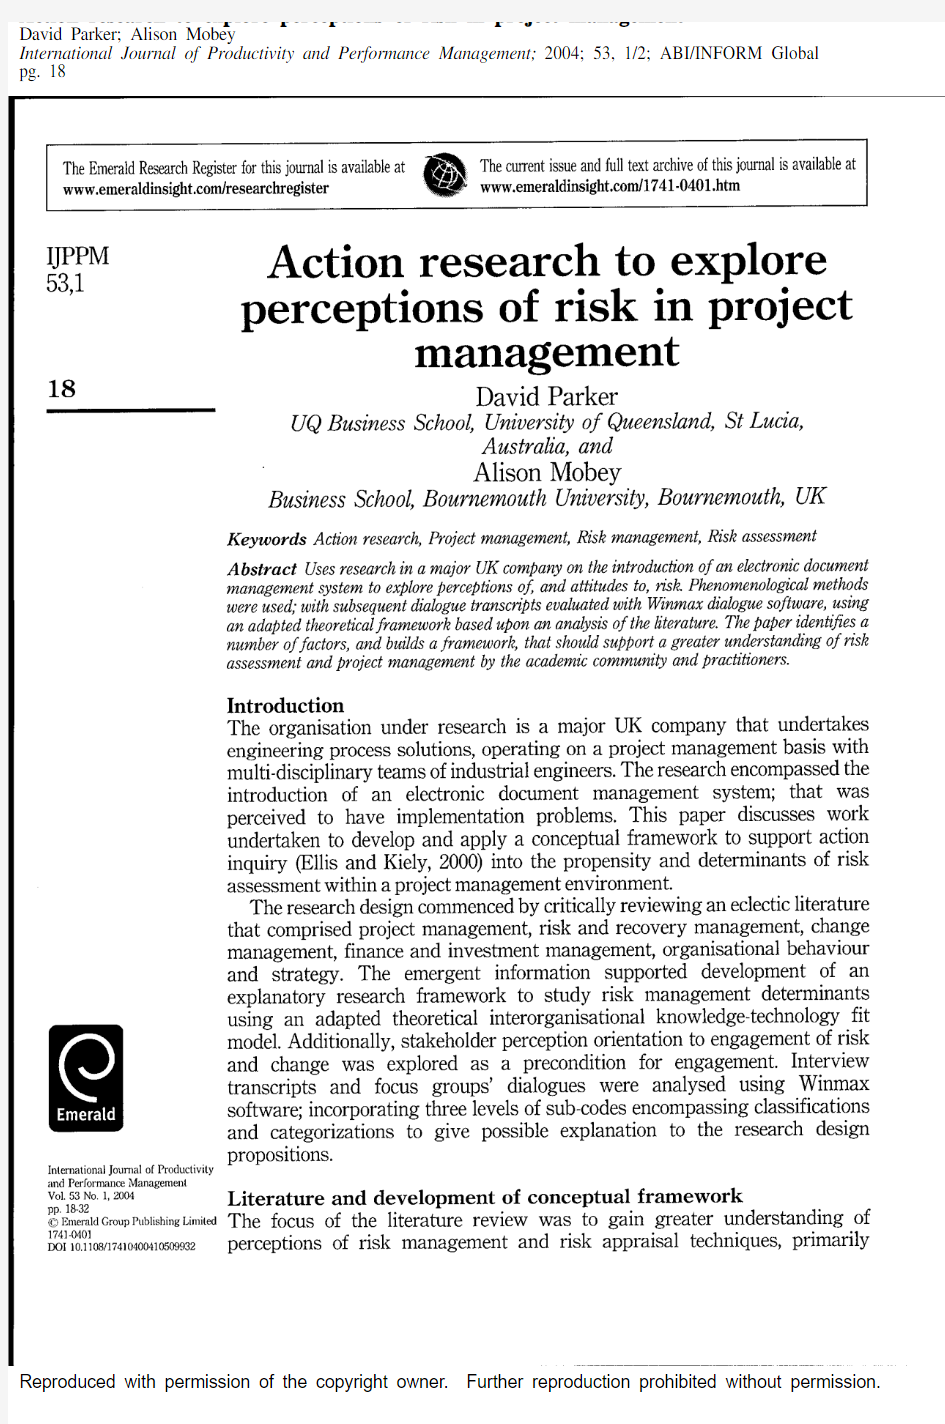 Action research to explore perceptions of risk in project management